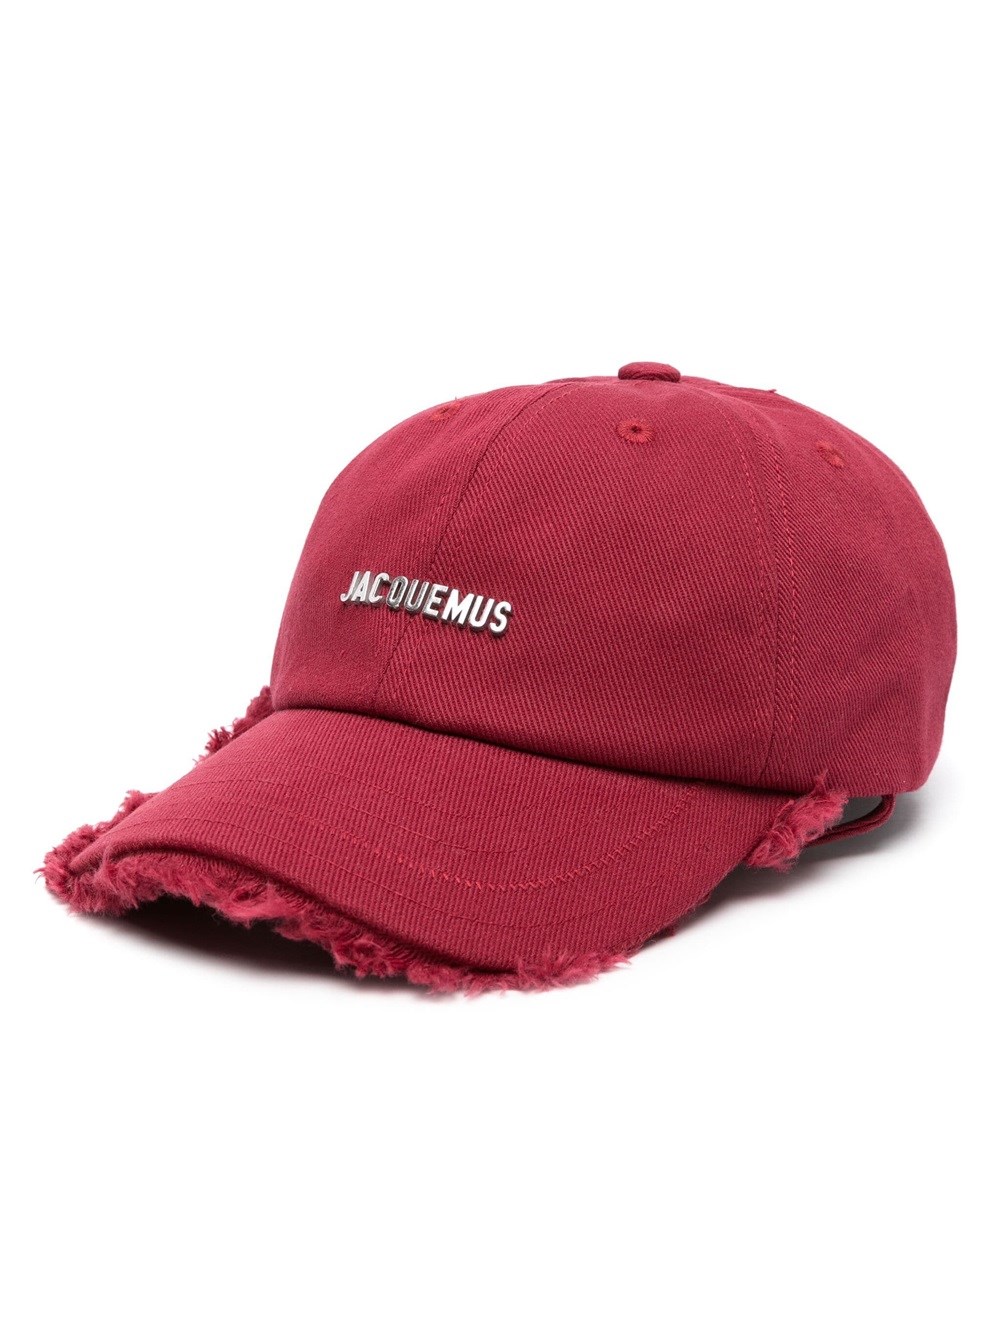 Jacquemus Artichaut Baseball Cap With Fringes In Red